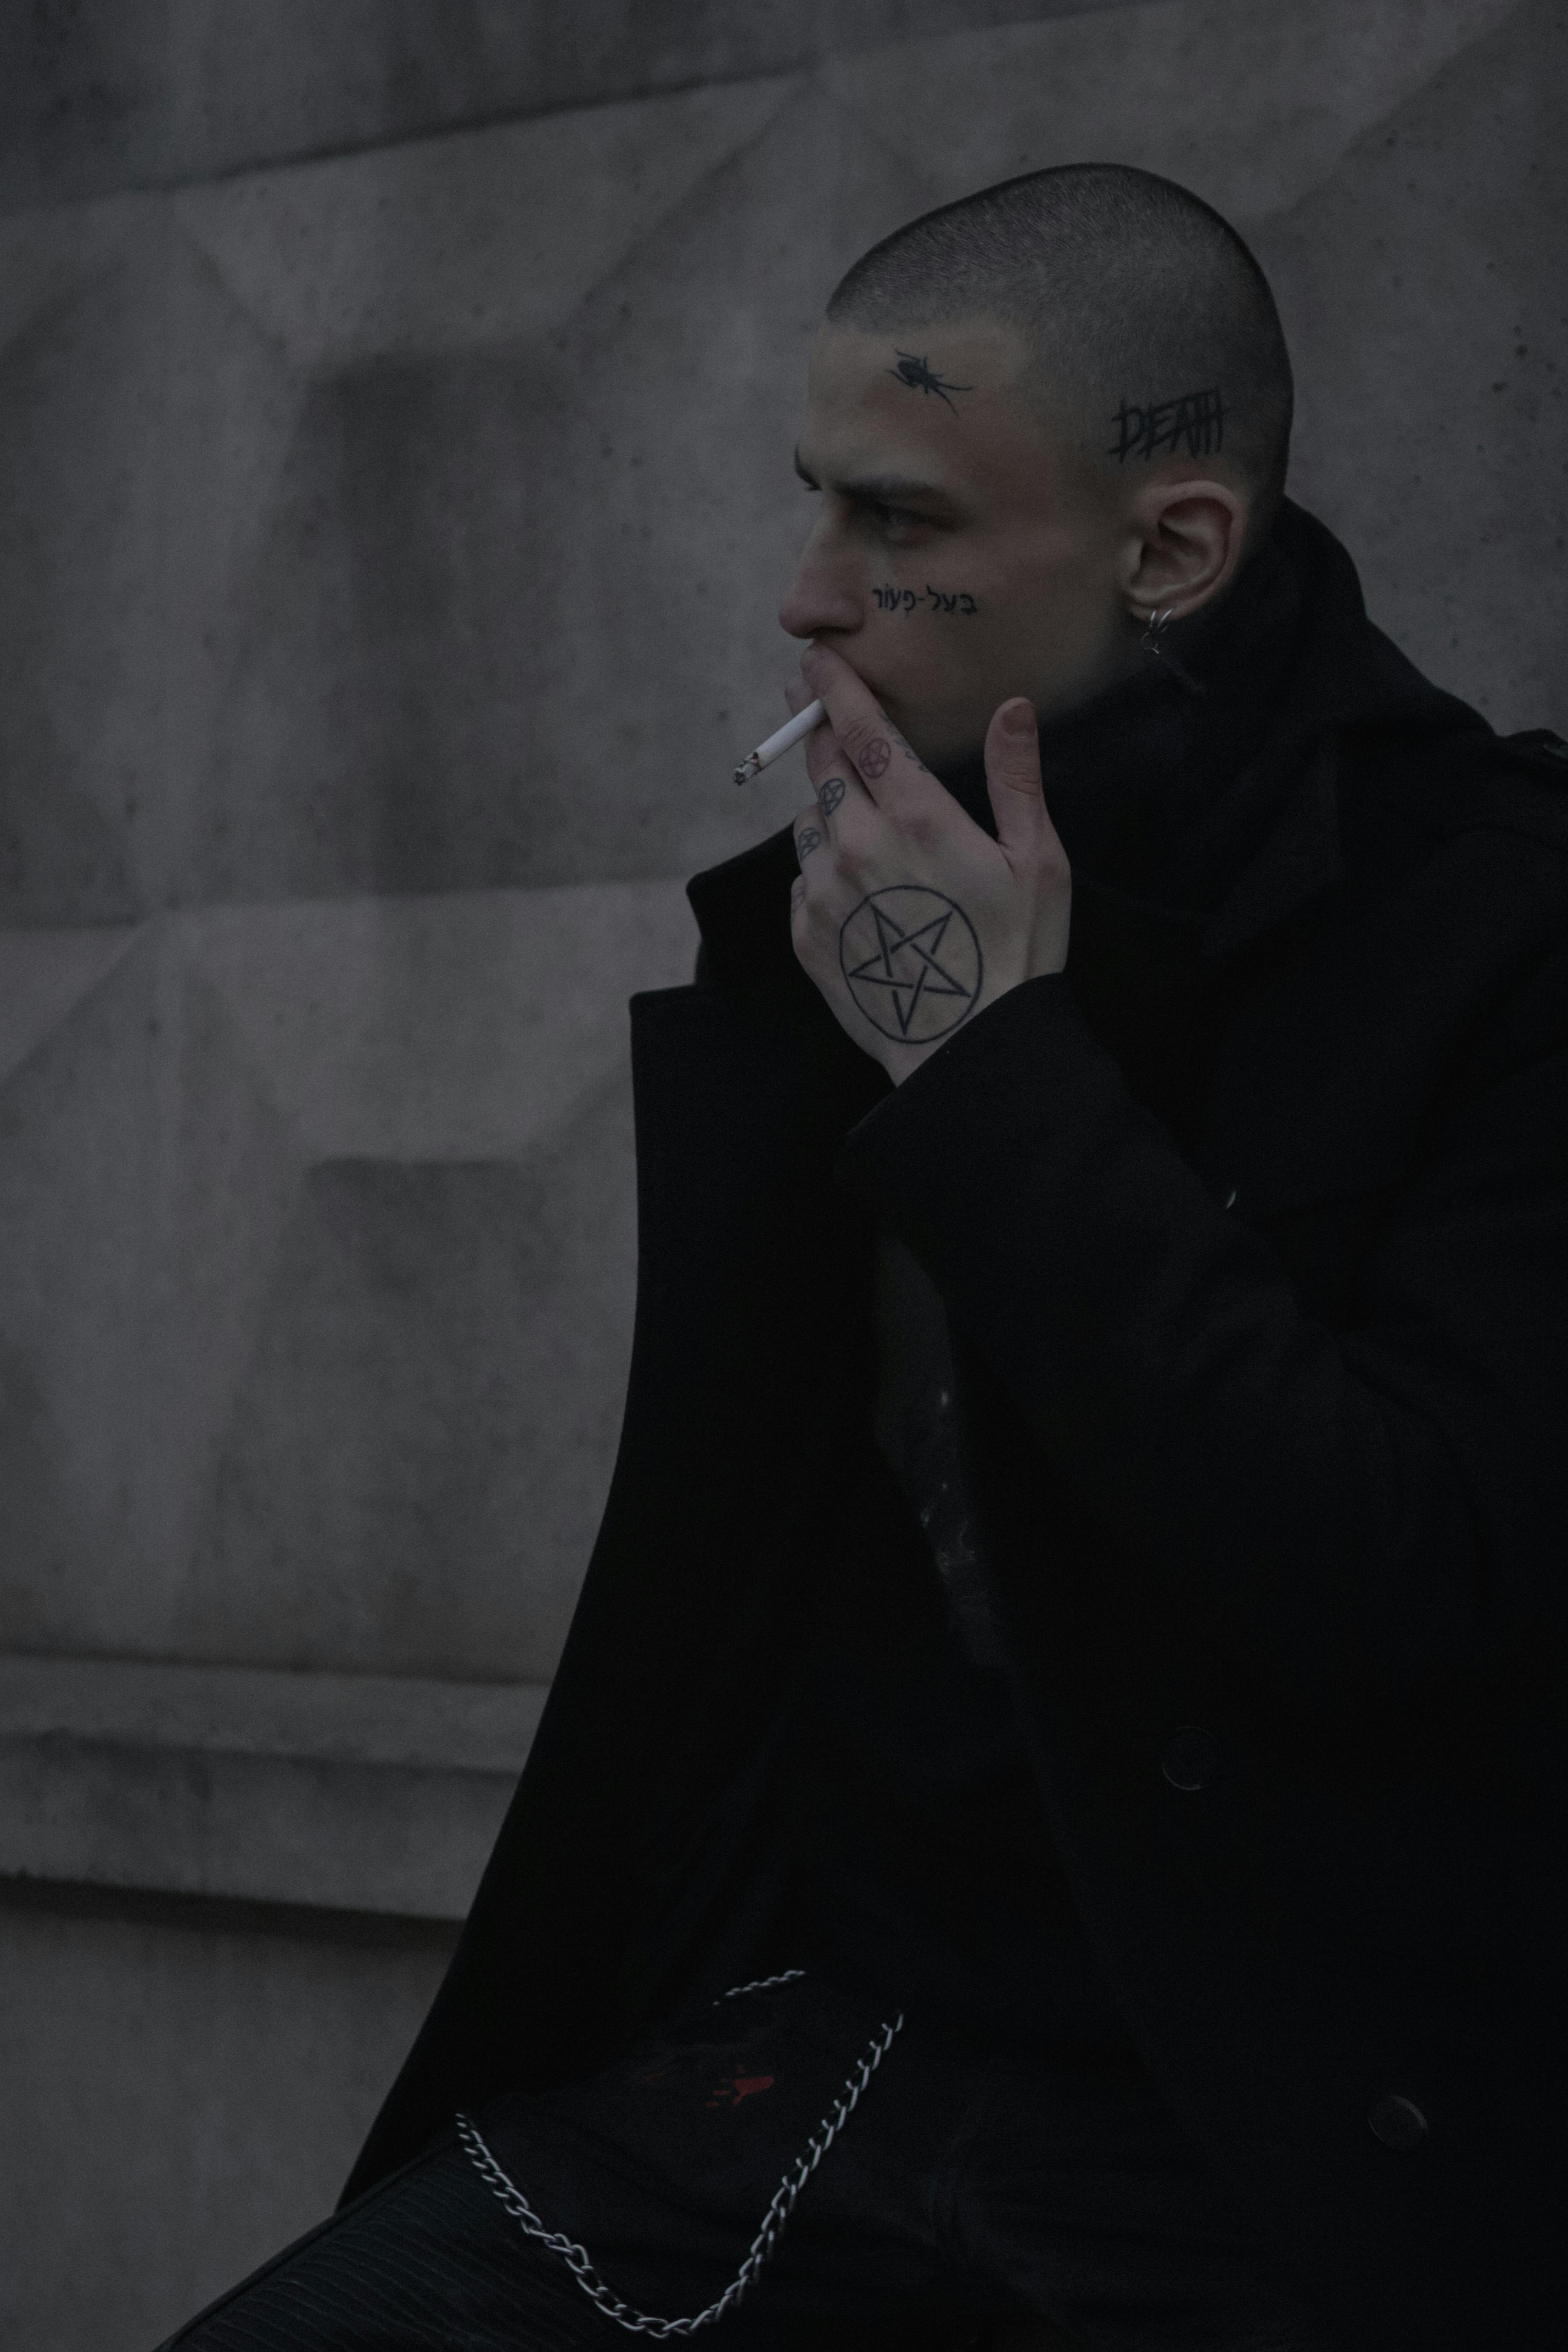 Man Leaning On Wall Smoking Photos, Download The BEST Free Man Leaning ...